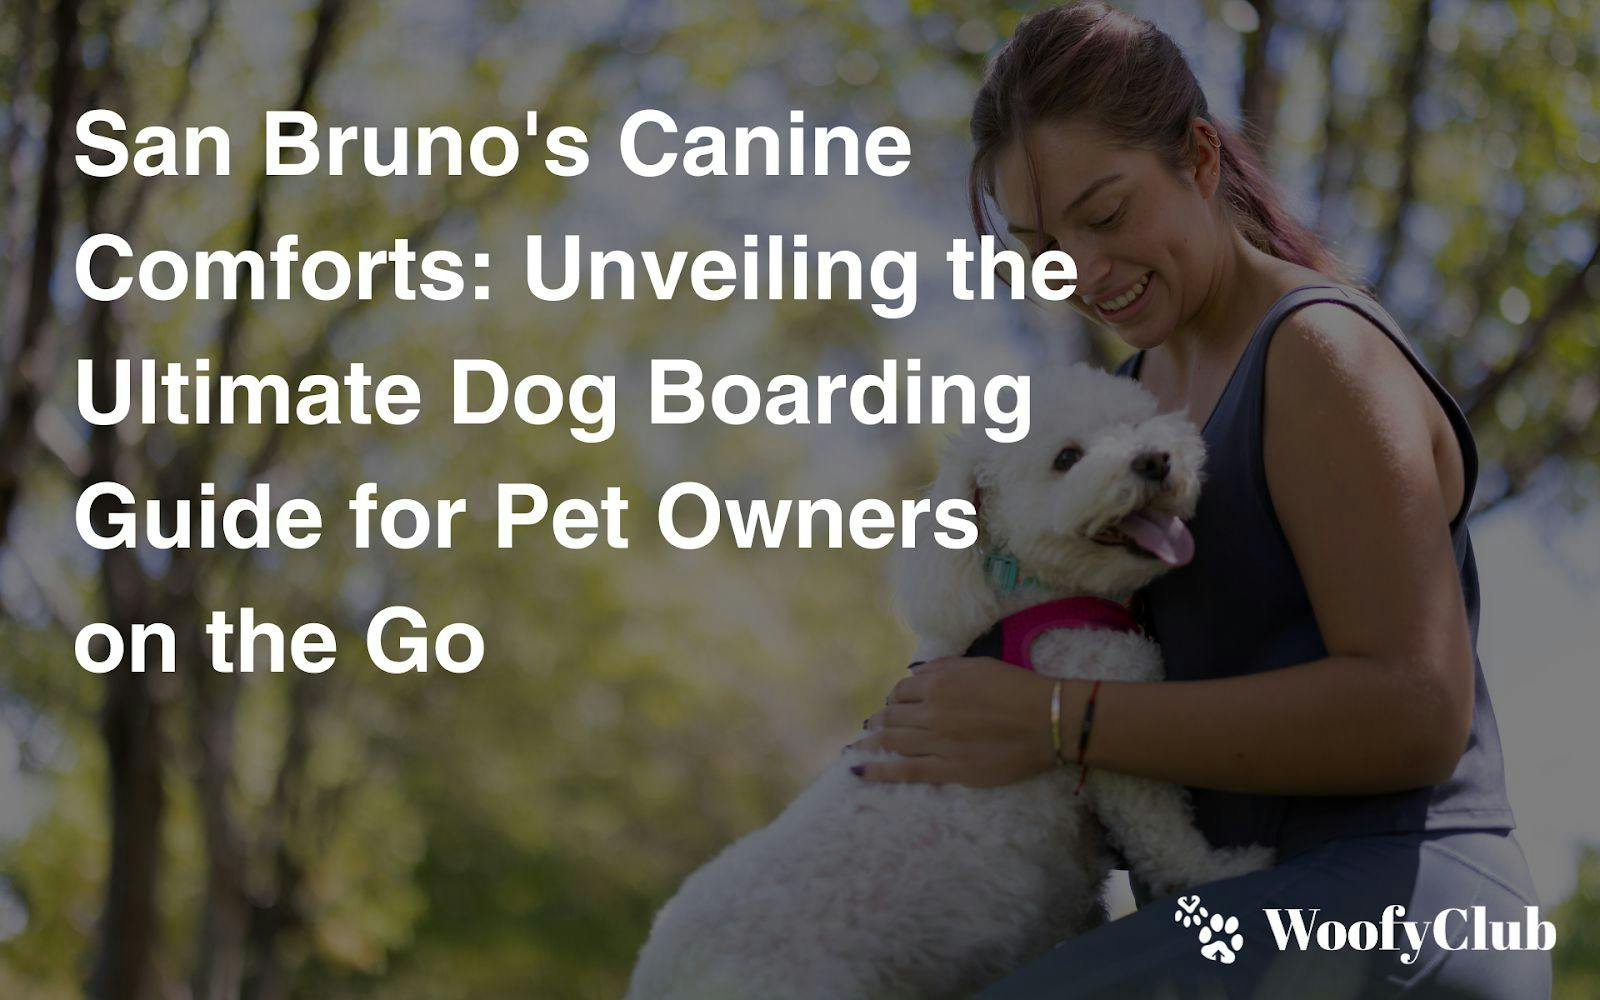 San Bruno's Canine Comforts: Unveiling The Ultimate Dog Boarding Guide For Pet Owners On The Go